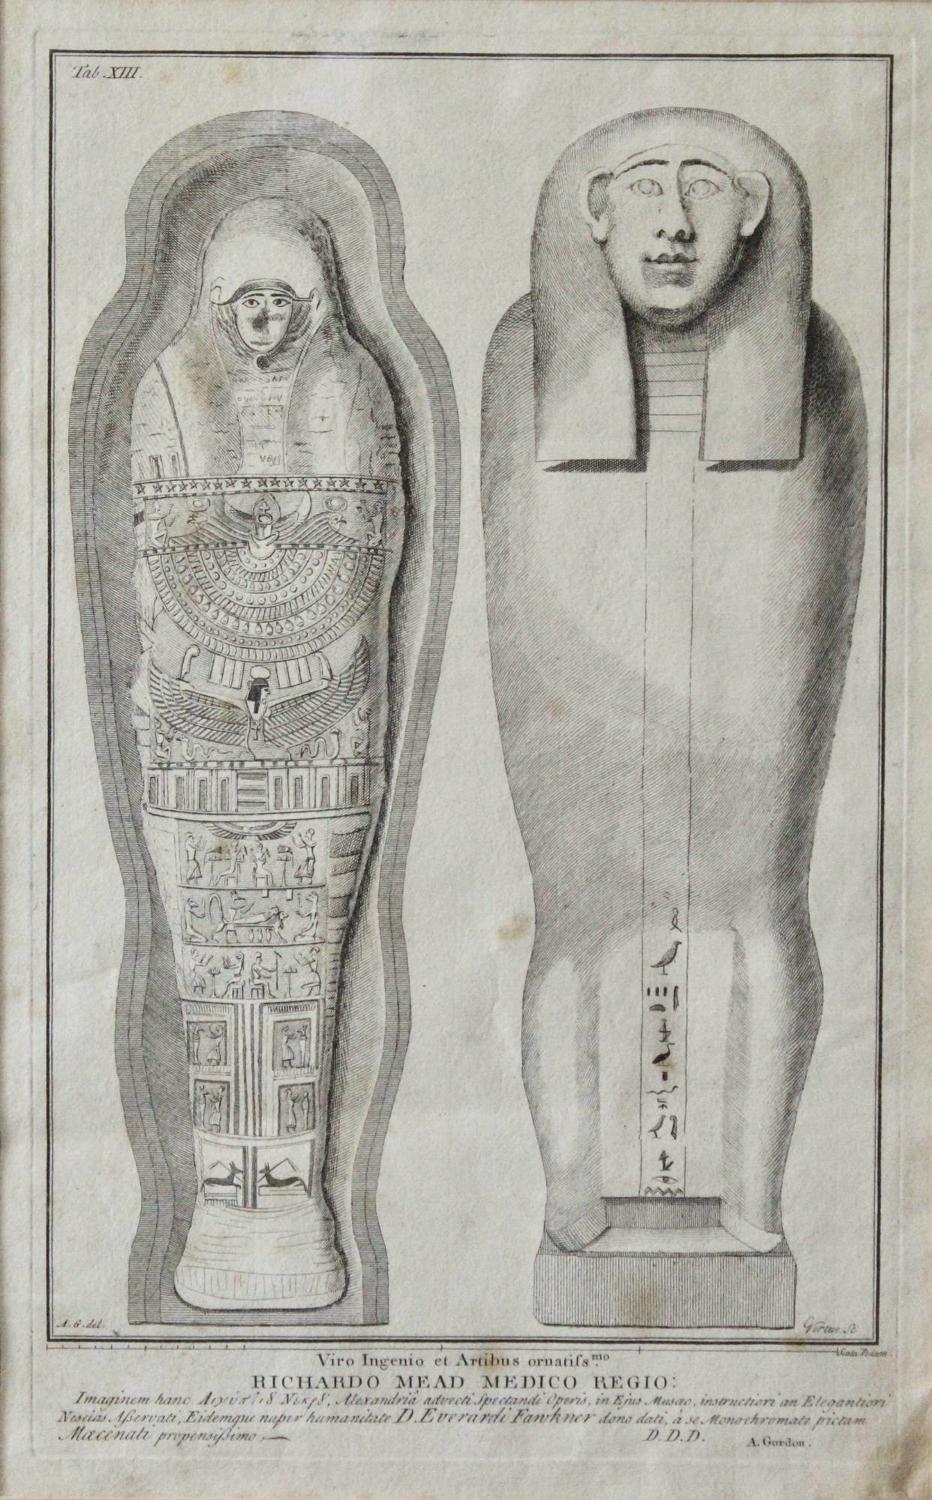 George Vertue after Alexander Gordon, Rare Engraving of an Egyptian Mummy from the Collection of Dr. Richard Mead, 1737